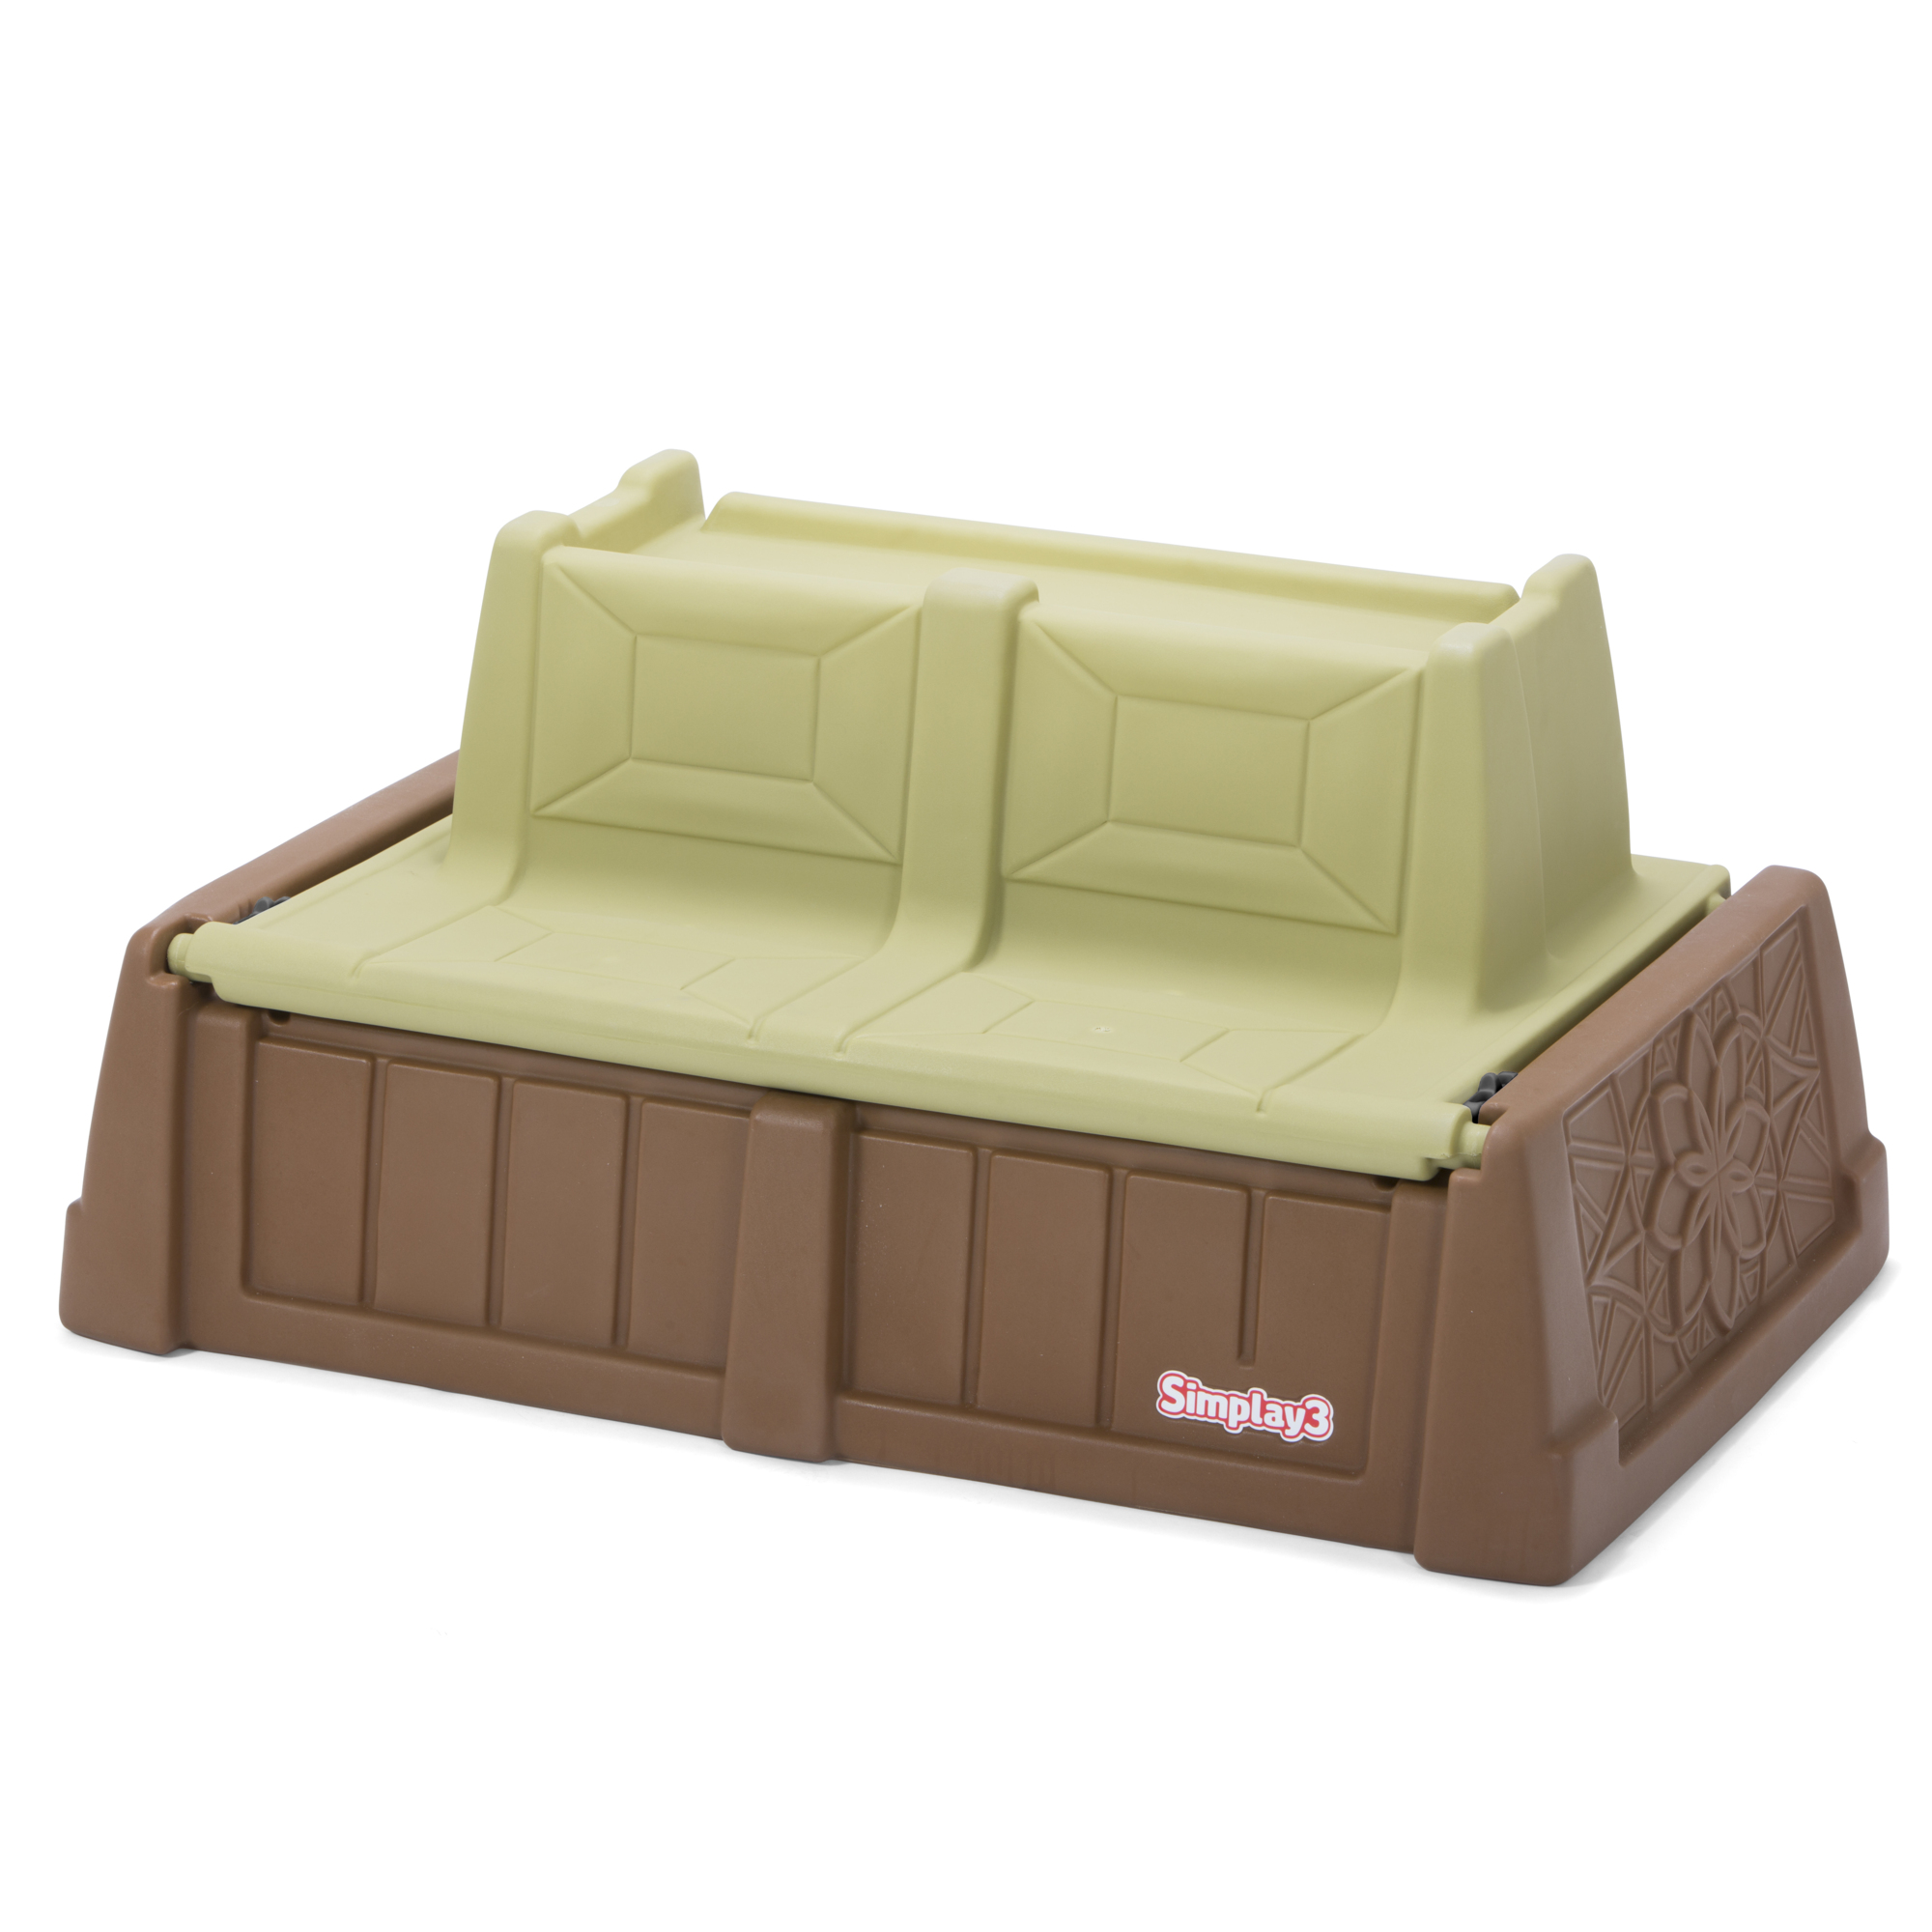 Simplay3 Company, Sand and Water Bench, Model 217020-01